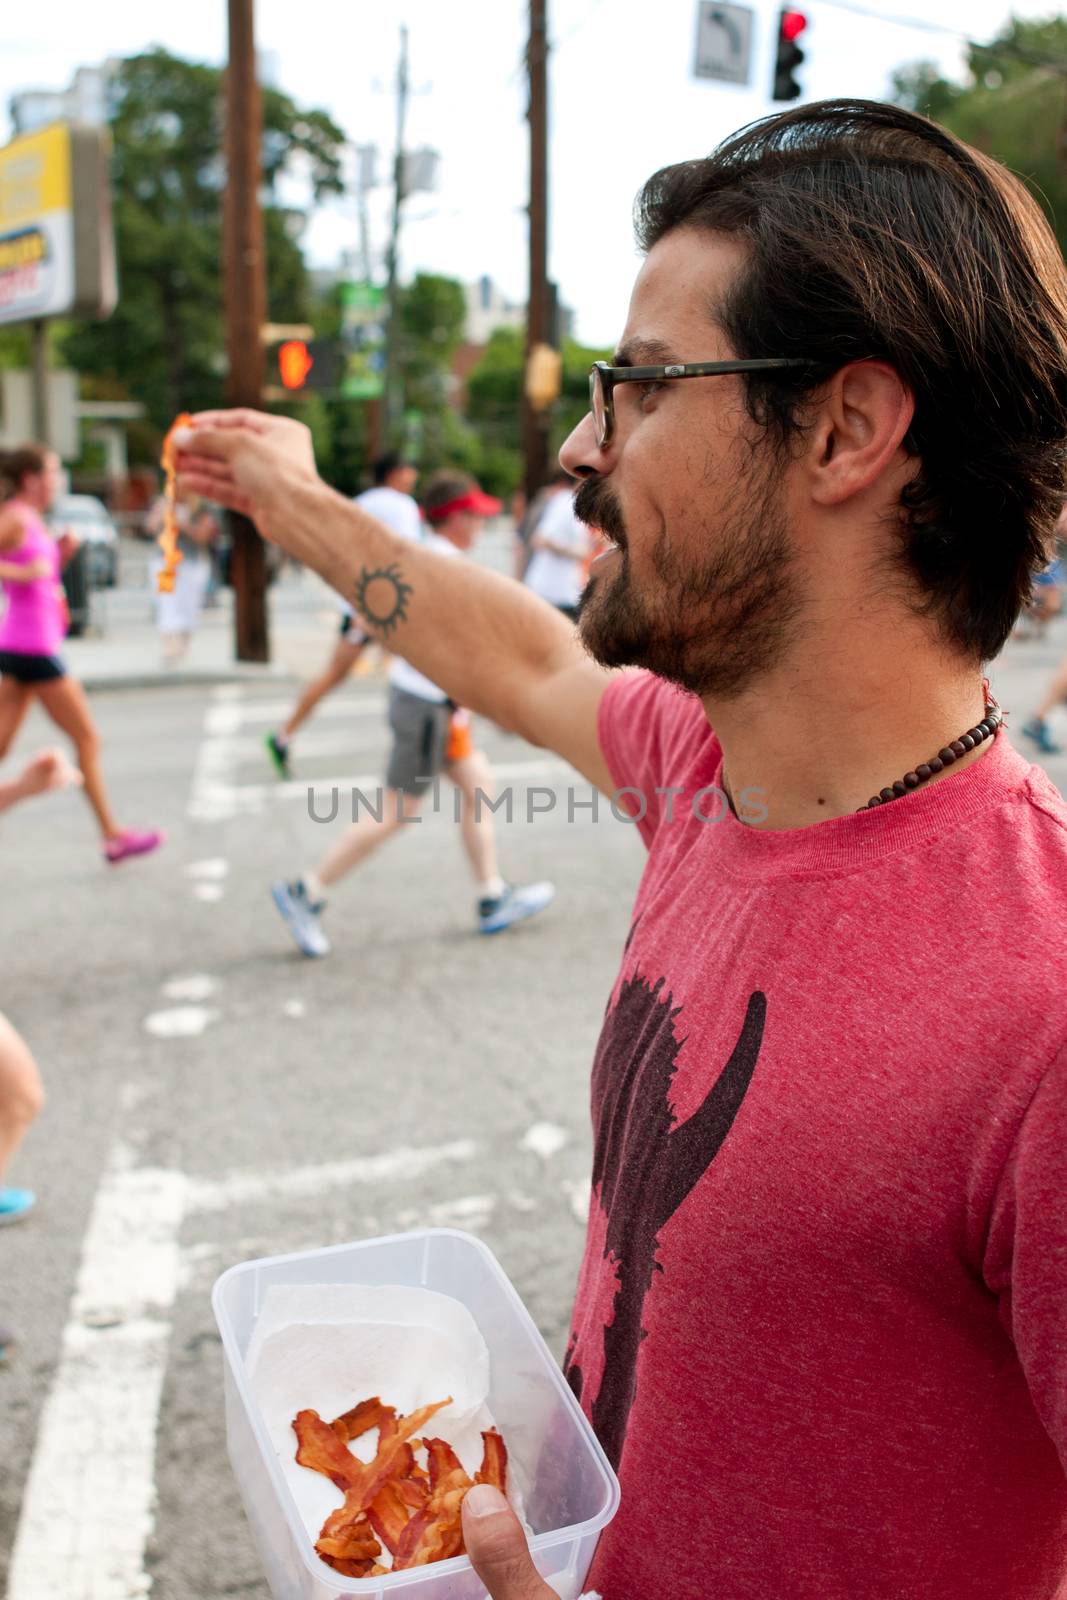 Atlanta, GA, USA - July 4, 2014:  An unidentified man gives out strips of bacon to exhausted runners as they near the finish line of the Peachtree Road Race.